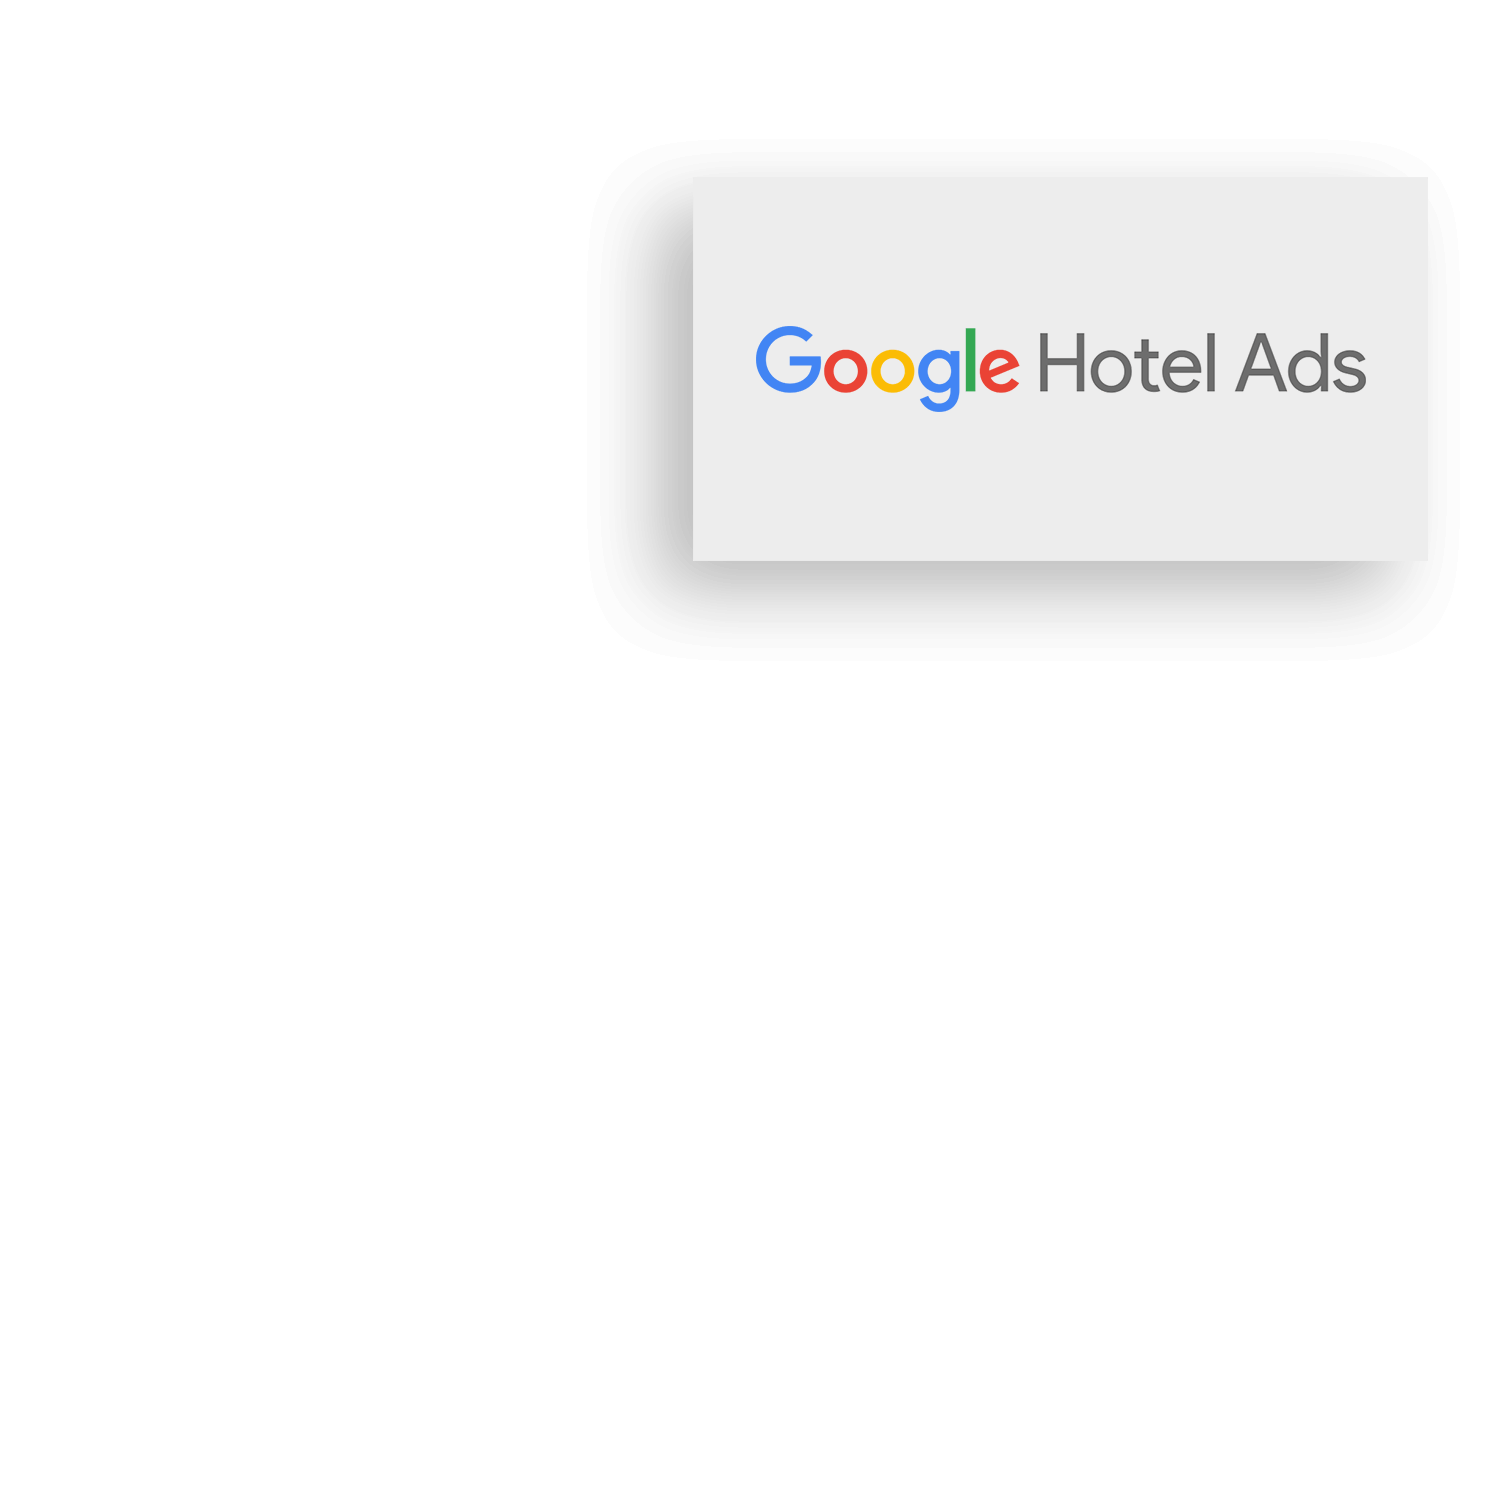 Hotelier using Google hotel ads through their PMS software